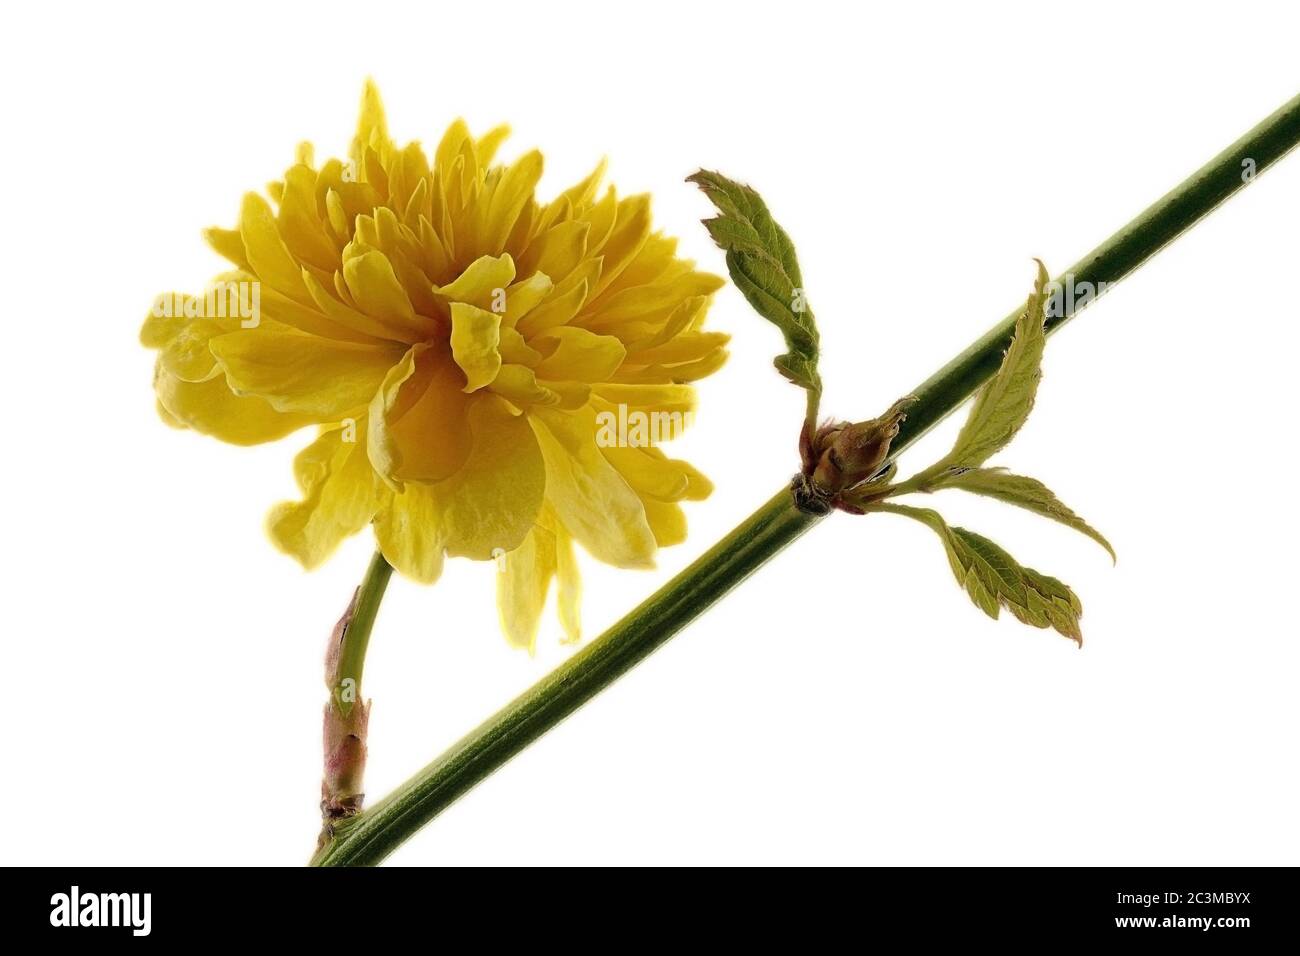 yellow ranunculus shrub - Kerria japonica - on a white background with a branch and leaves Stock Photo